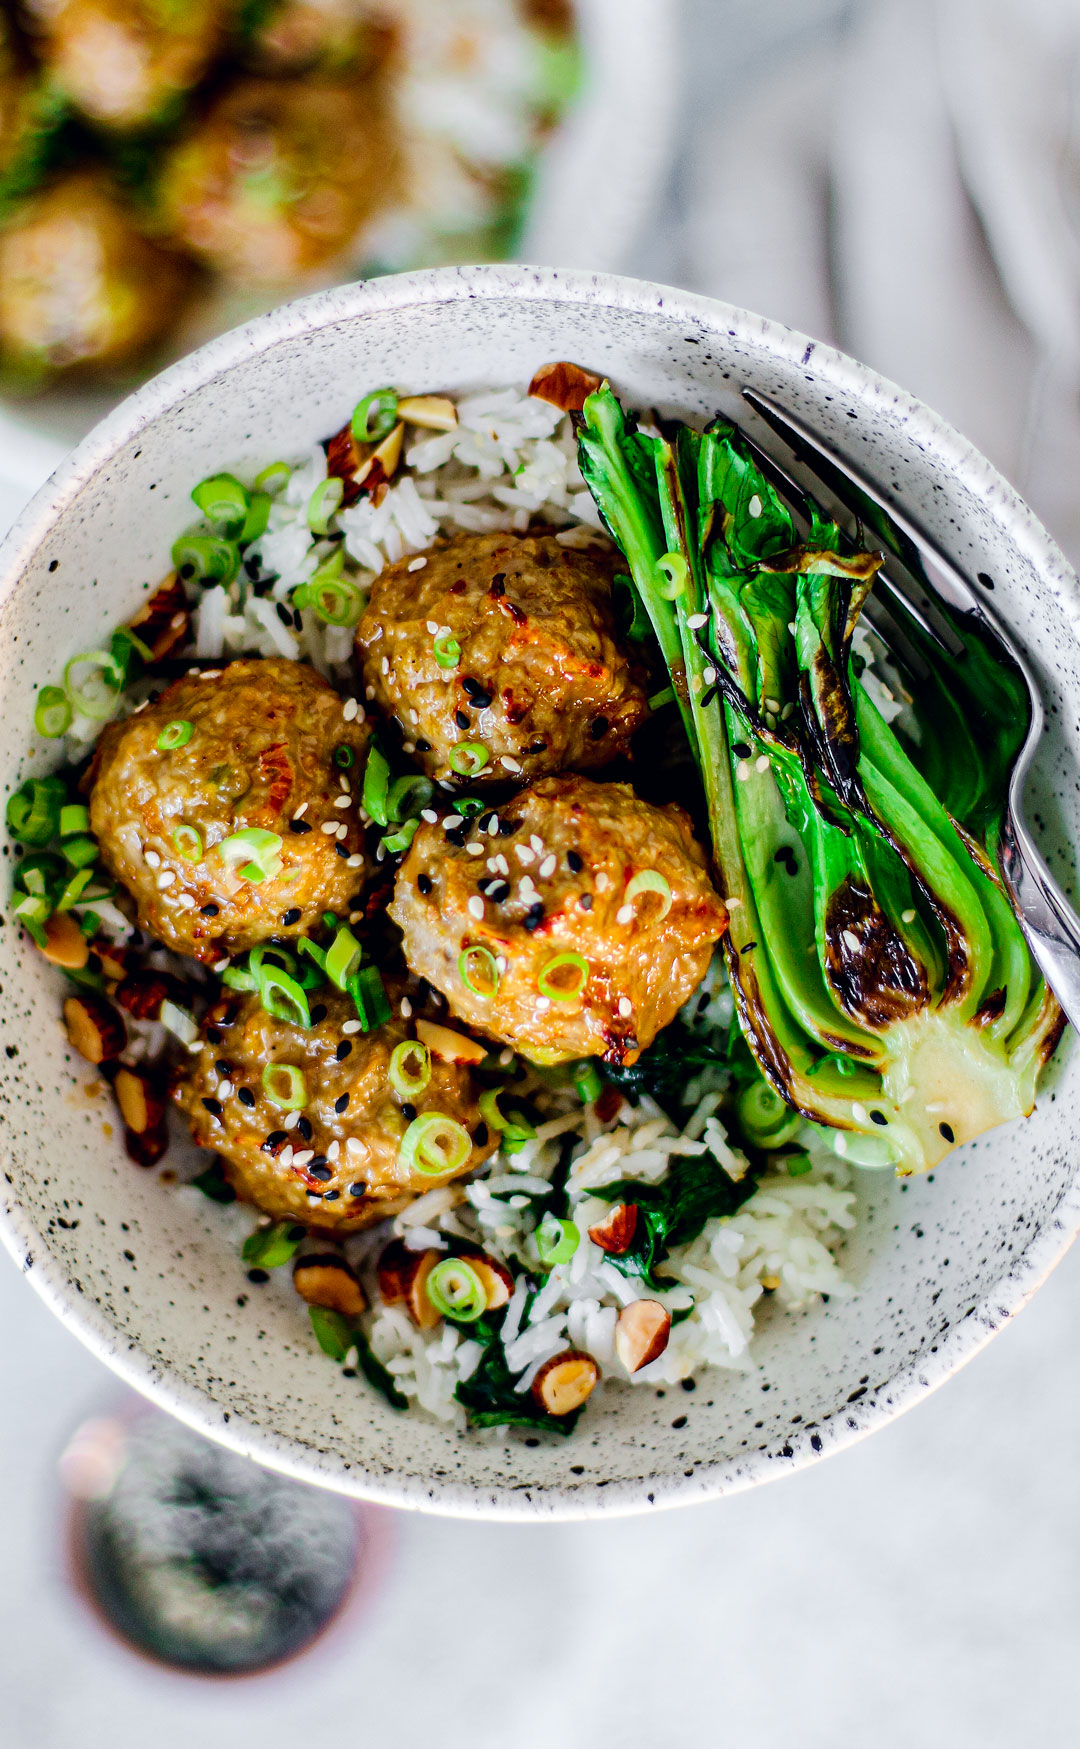 Turkey meatballs in a bowl with rice and bok choy.